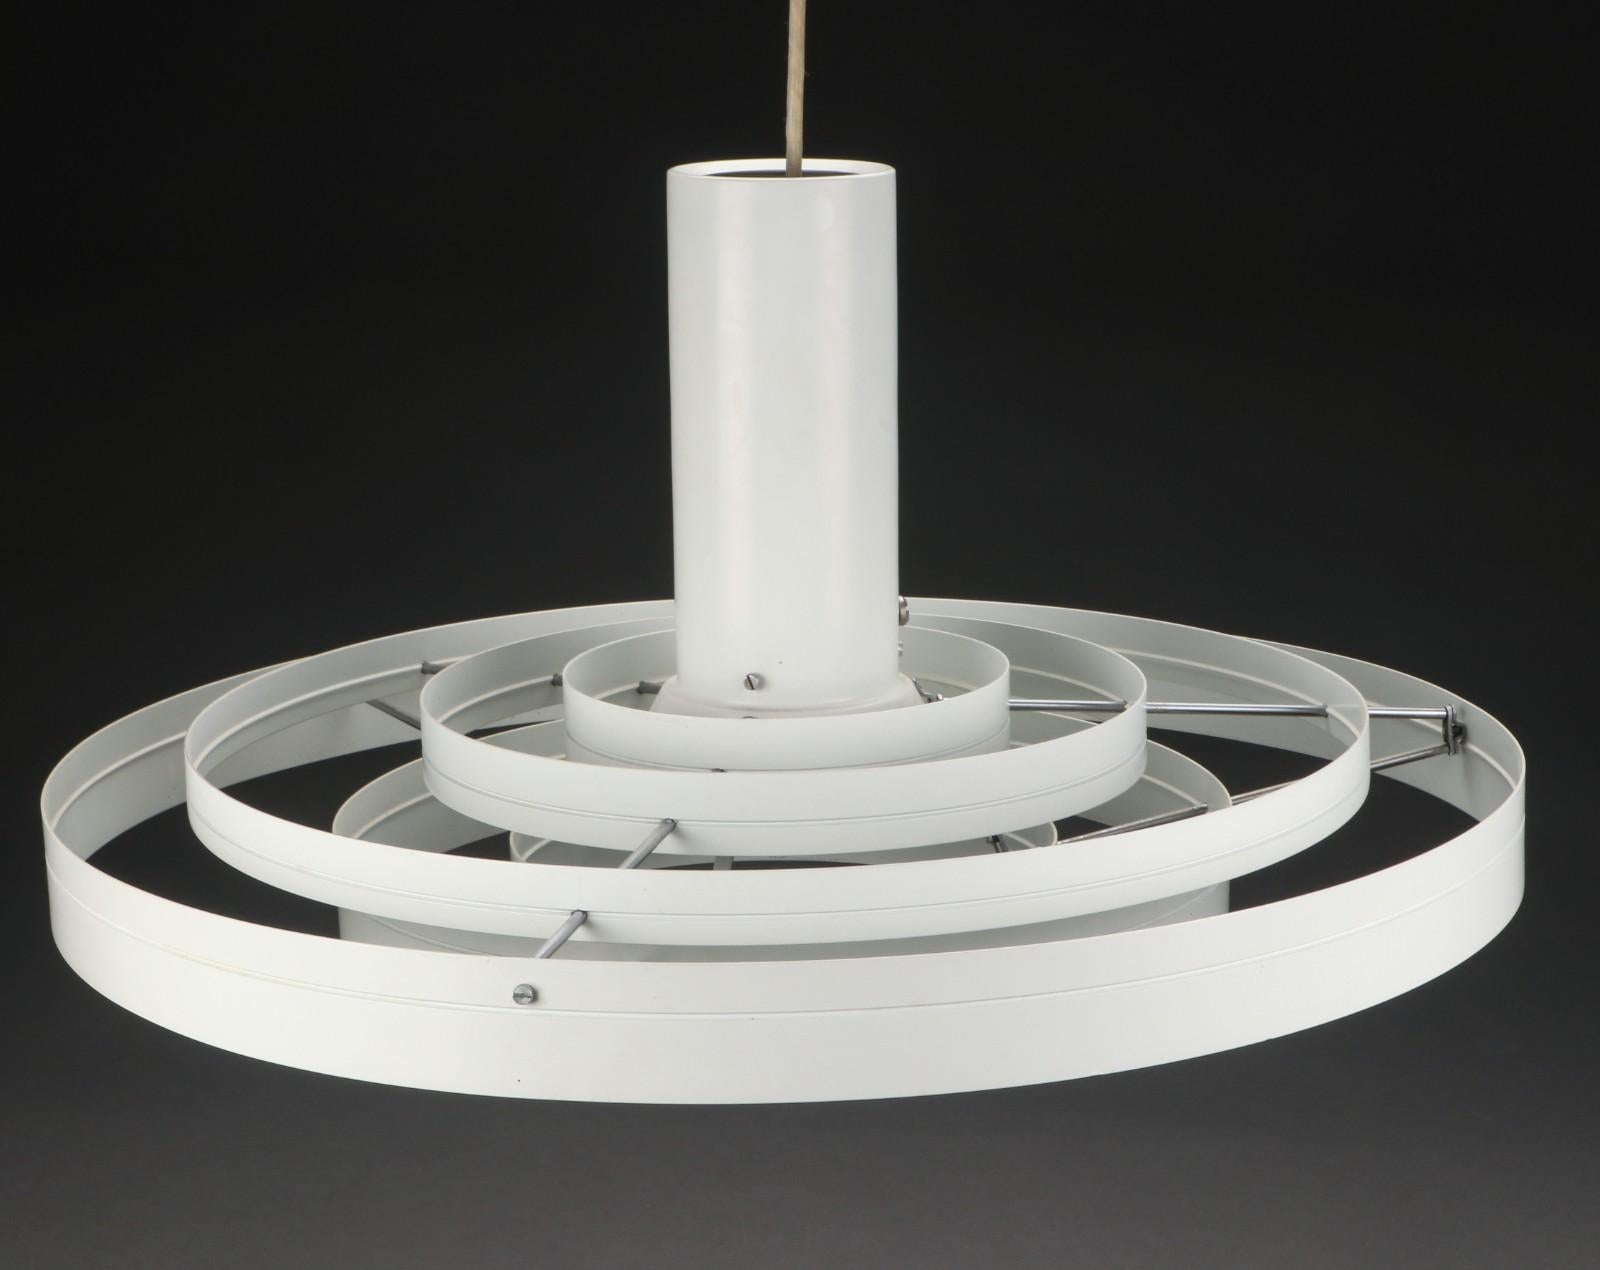 Sophus Frandsen for Fog & Mørup. Fibonacci pendant lamp in white lacquered aluminum. Produced by Fog & Mørup. Ø. Ca. 60 cm. Traces of wear, scratches, minor stains, wobble and missing base.